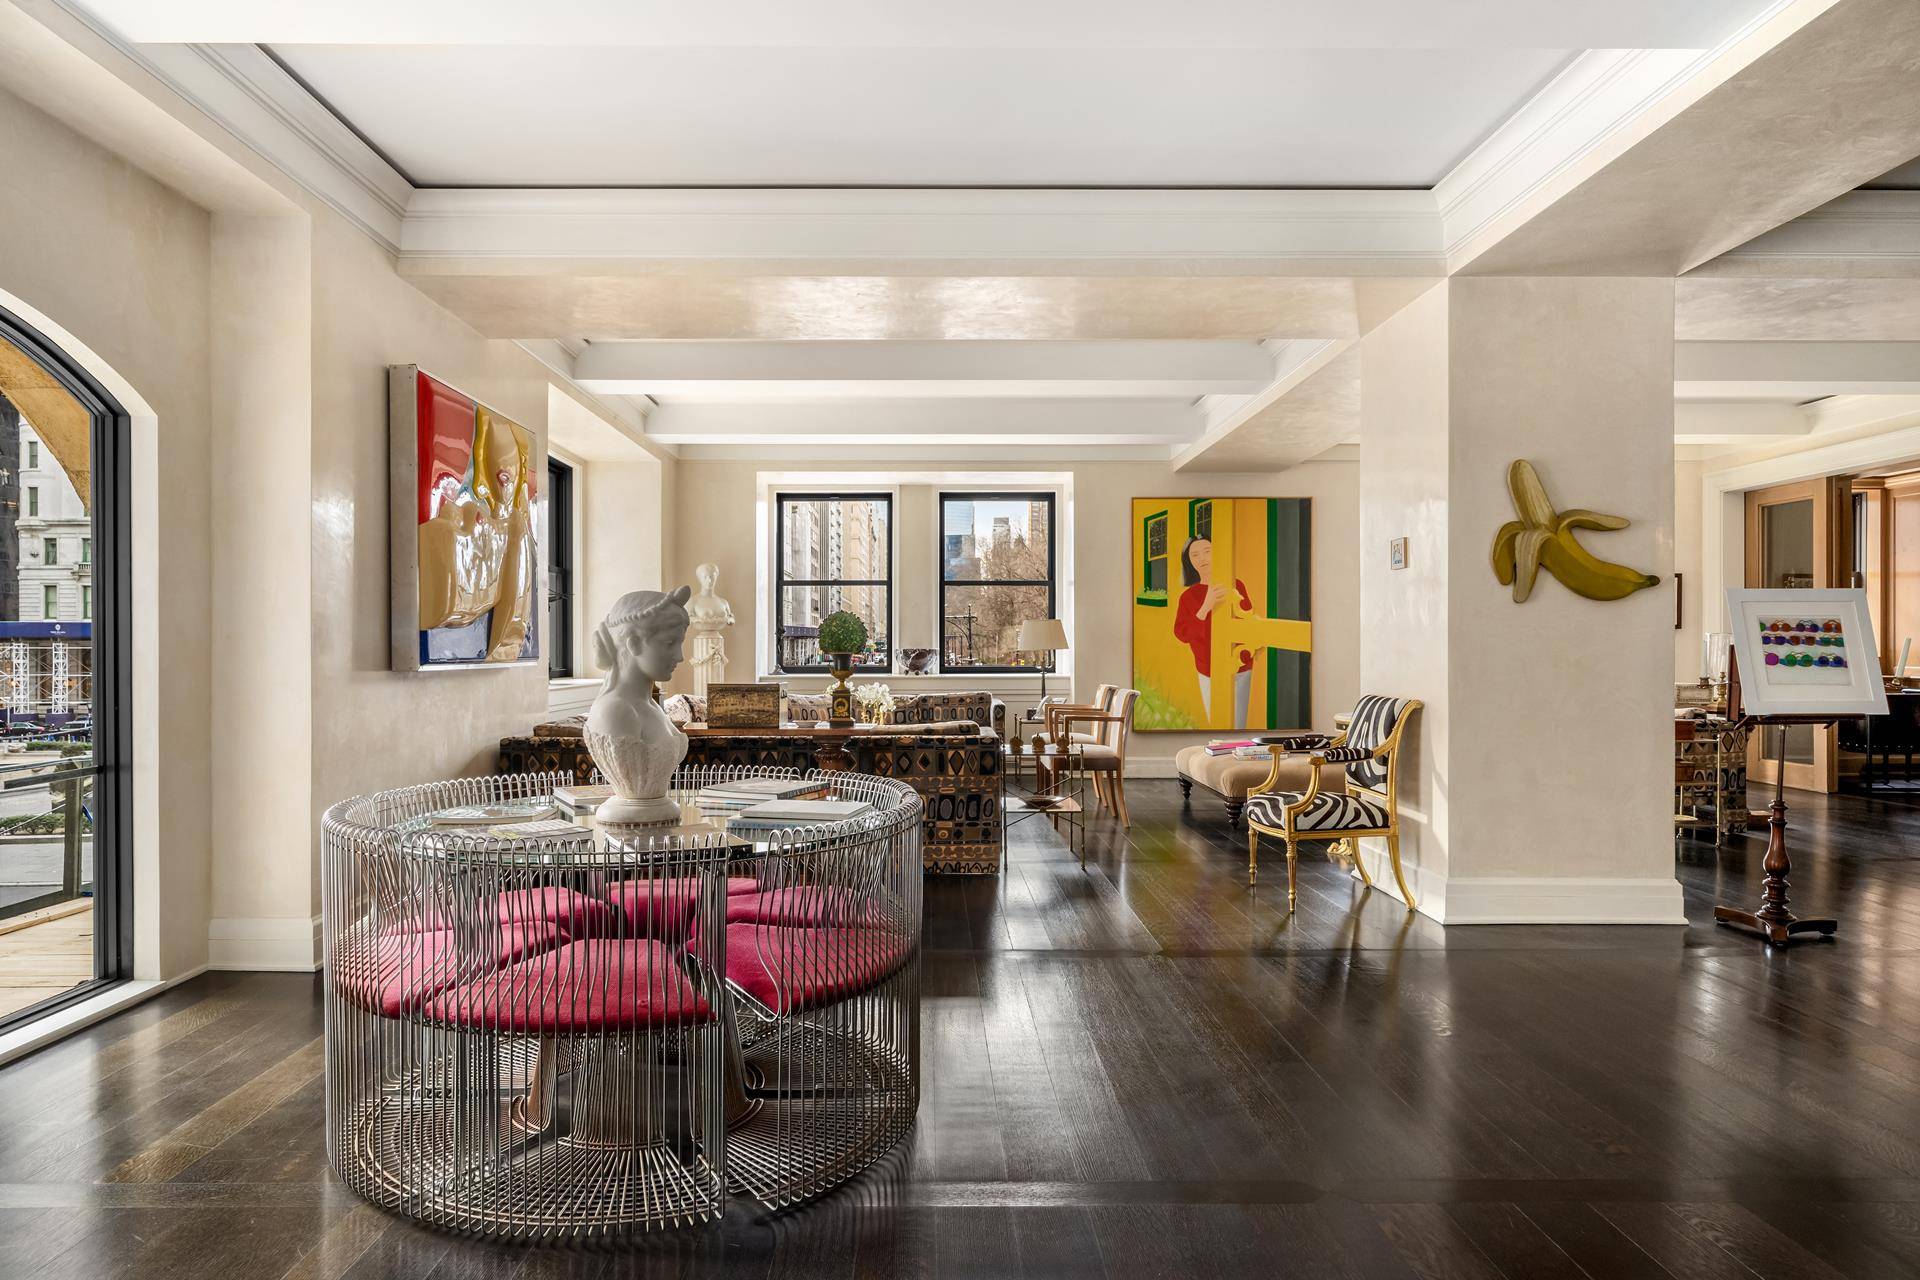 Occupying a full floor at the legendary Sherry Netherland, this 9, 000 square foot, 19 room uptown loft, designed by famed designer Mica Ertegun, is truly one of the most ...